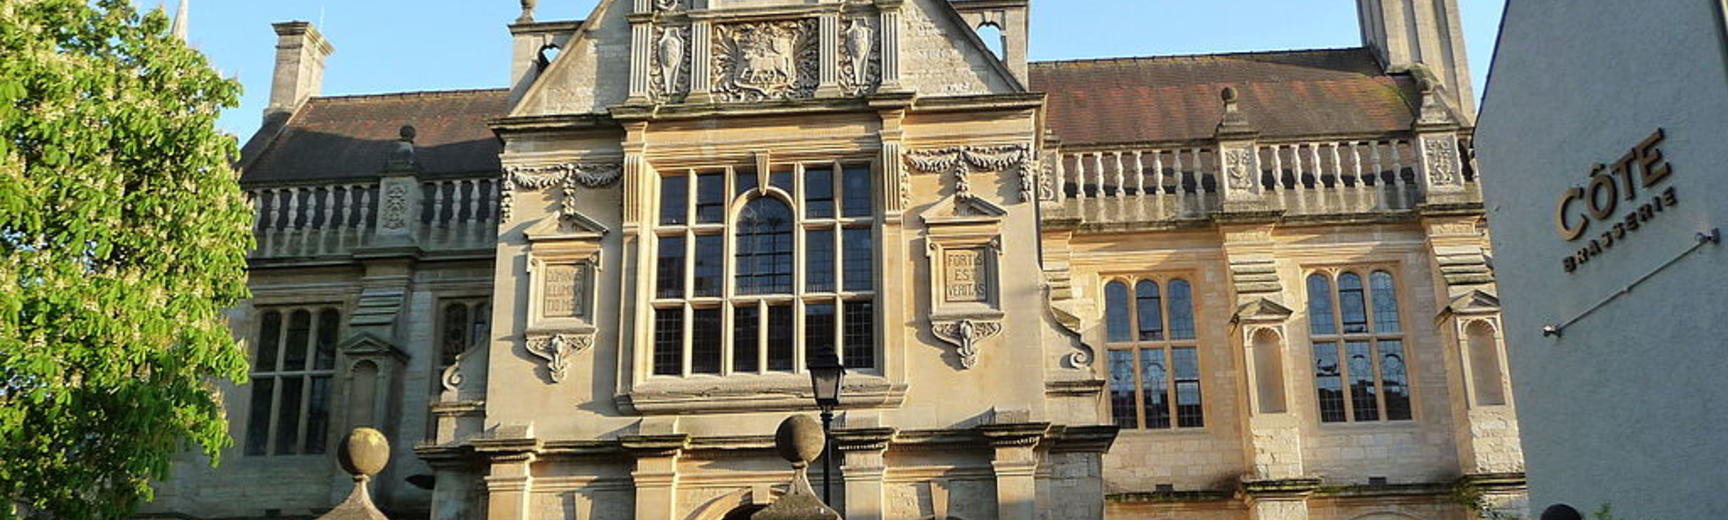 faculty of history university of oxford